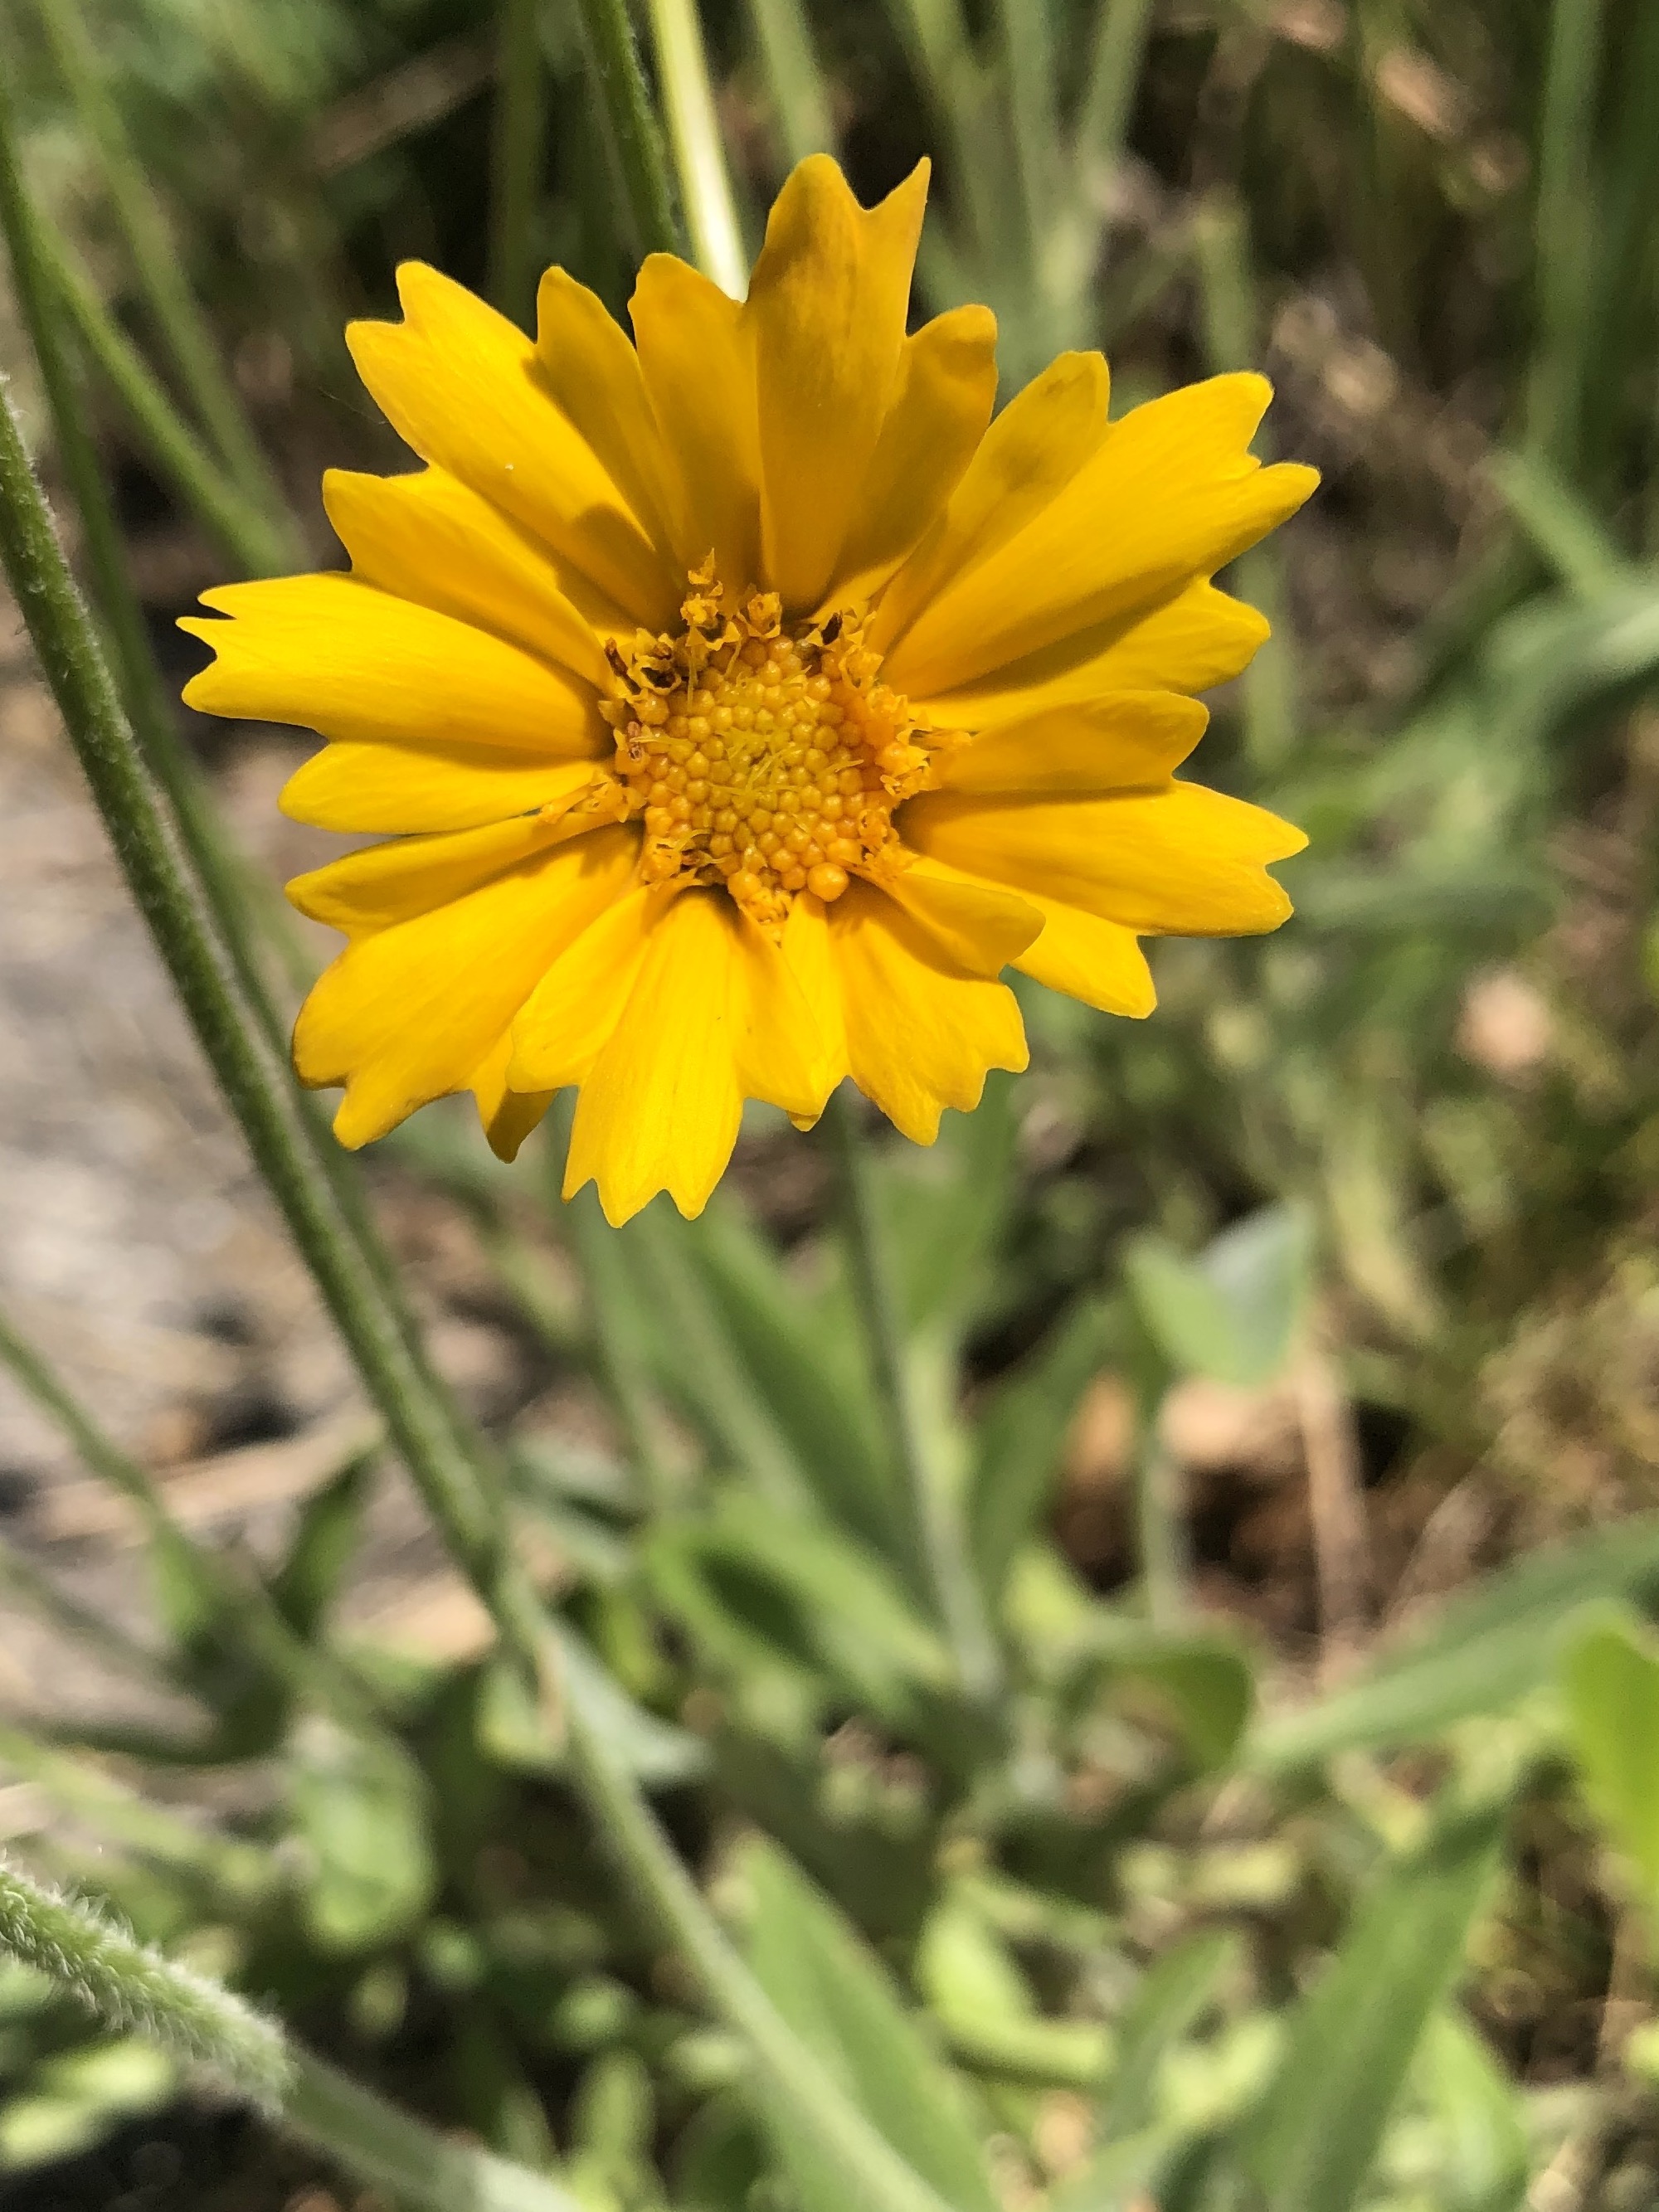 Lance-leaved coreopsis by UW Arbortetum Visitors Center in Madison, Wisconsin on June 22, 2021.